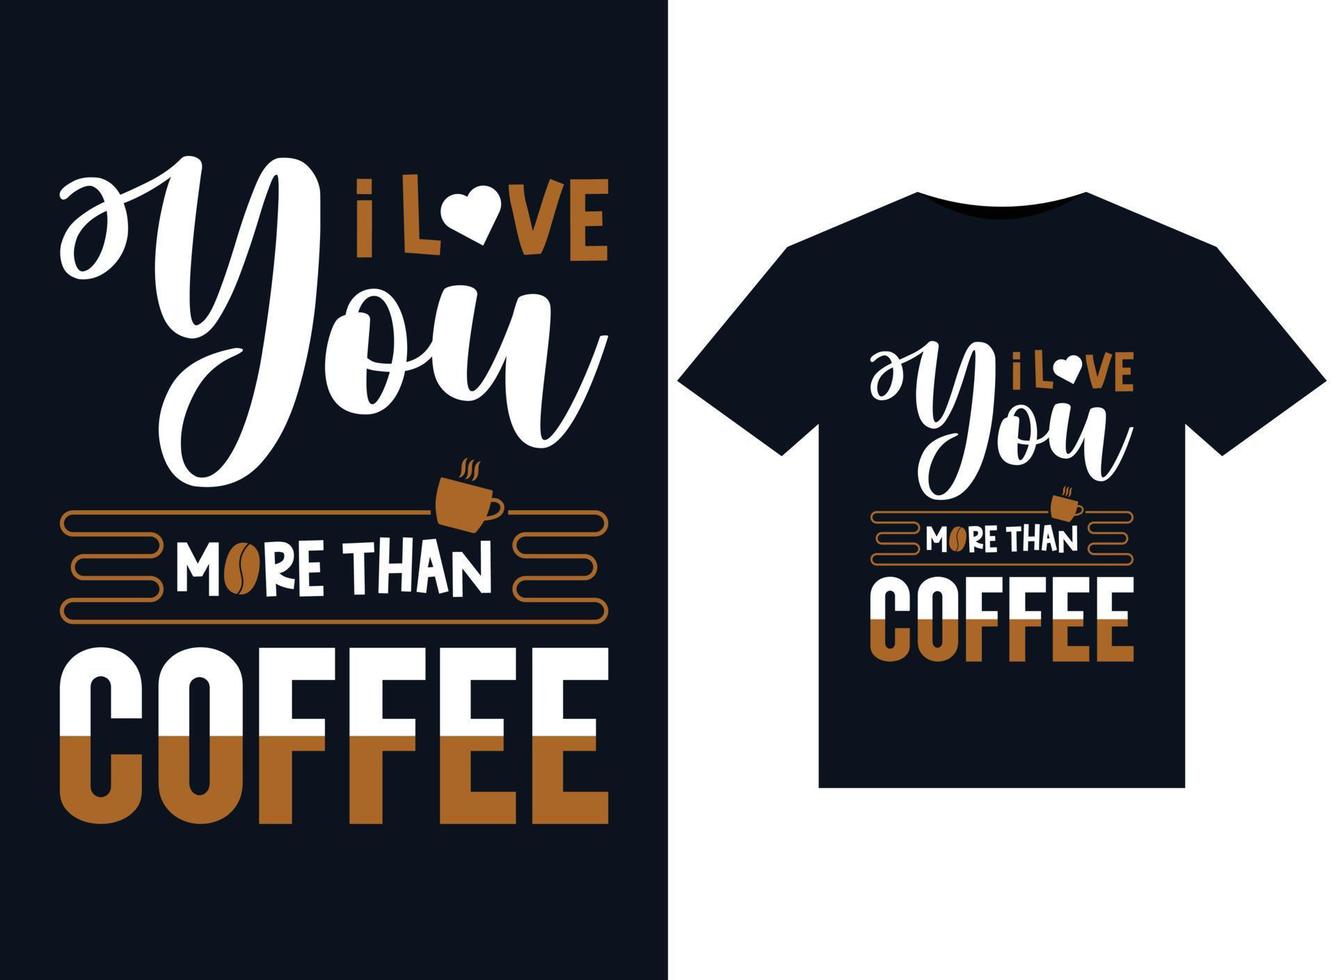 I love you more than coffee illustrations for print-ready T-Shirts design vector